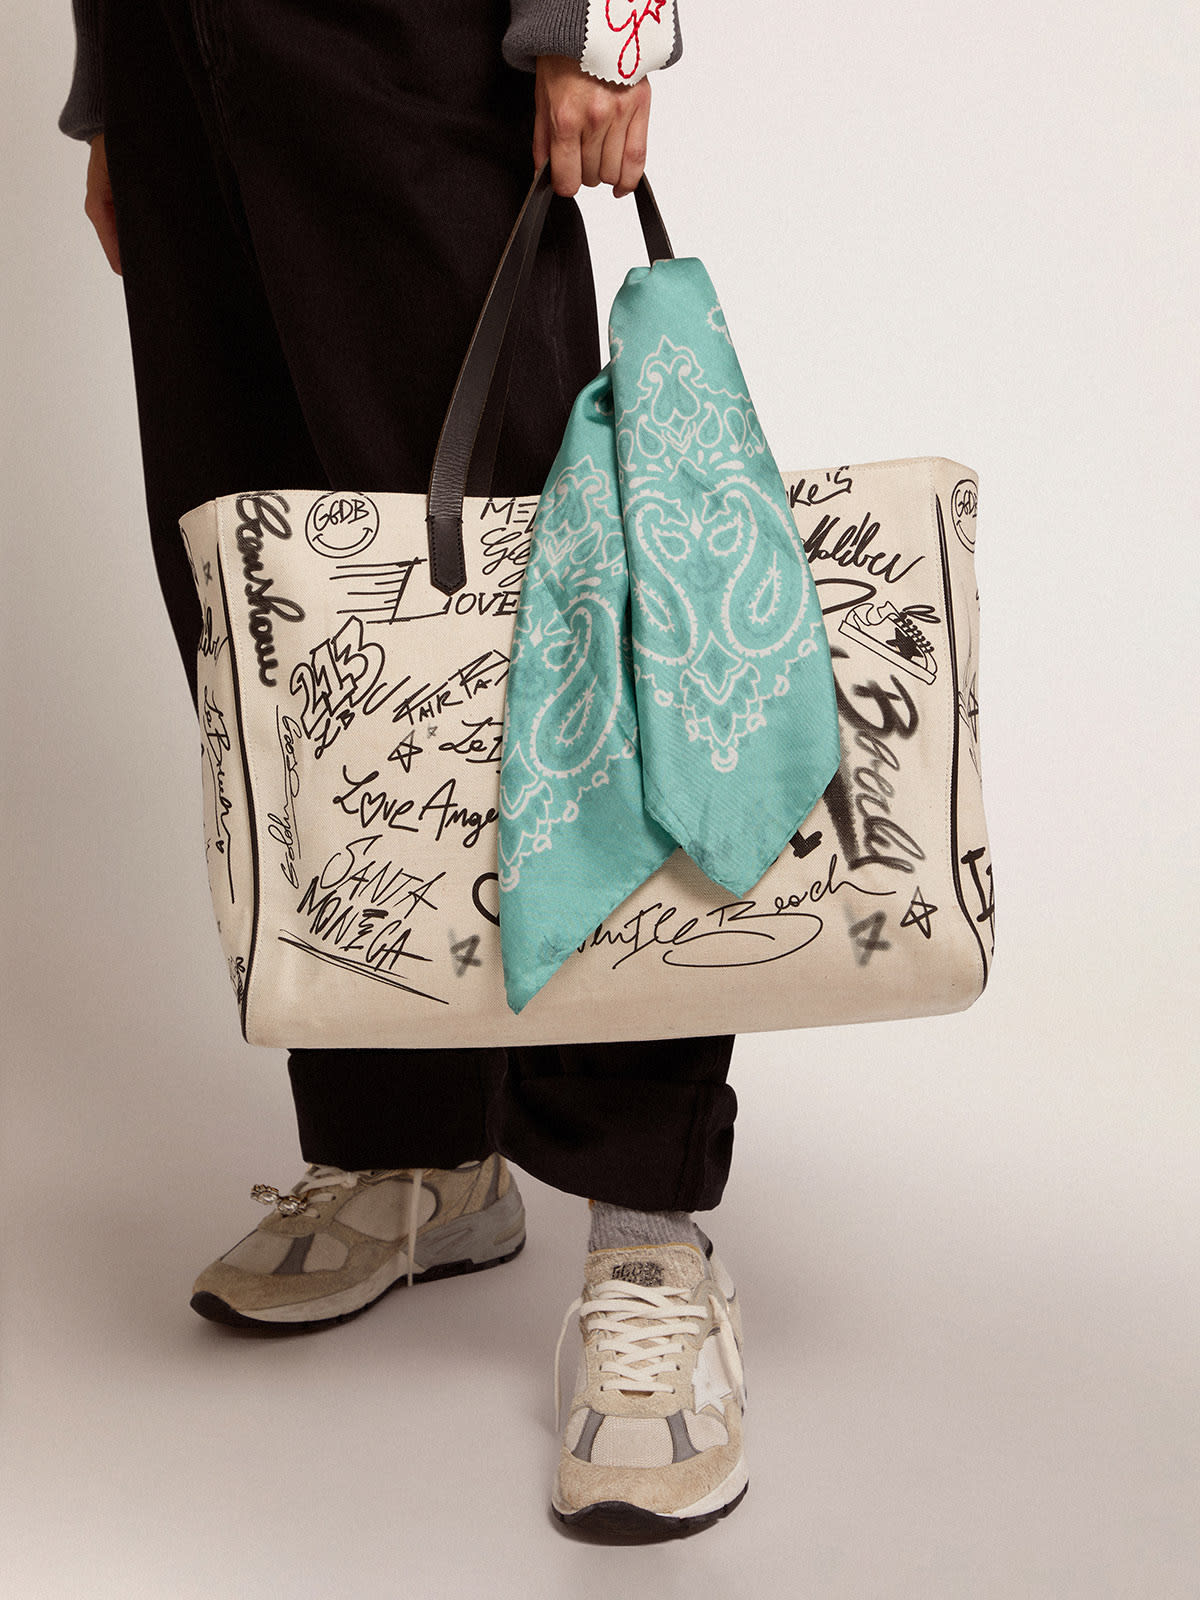 Golden Goose - Women's California Bag East-West white with graffiti print in 